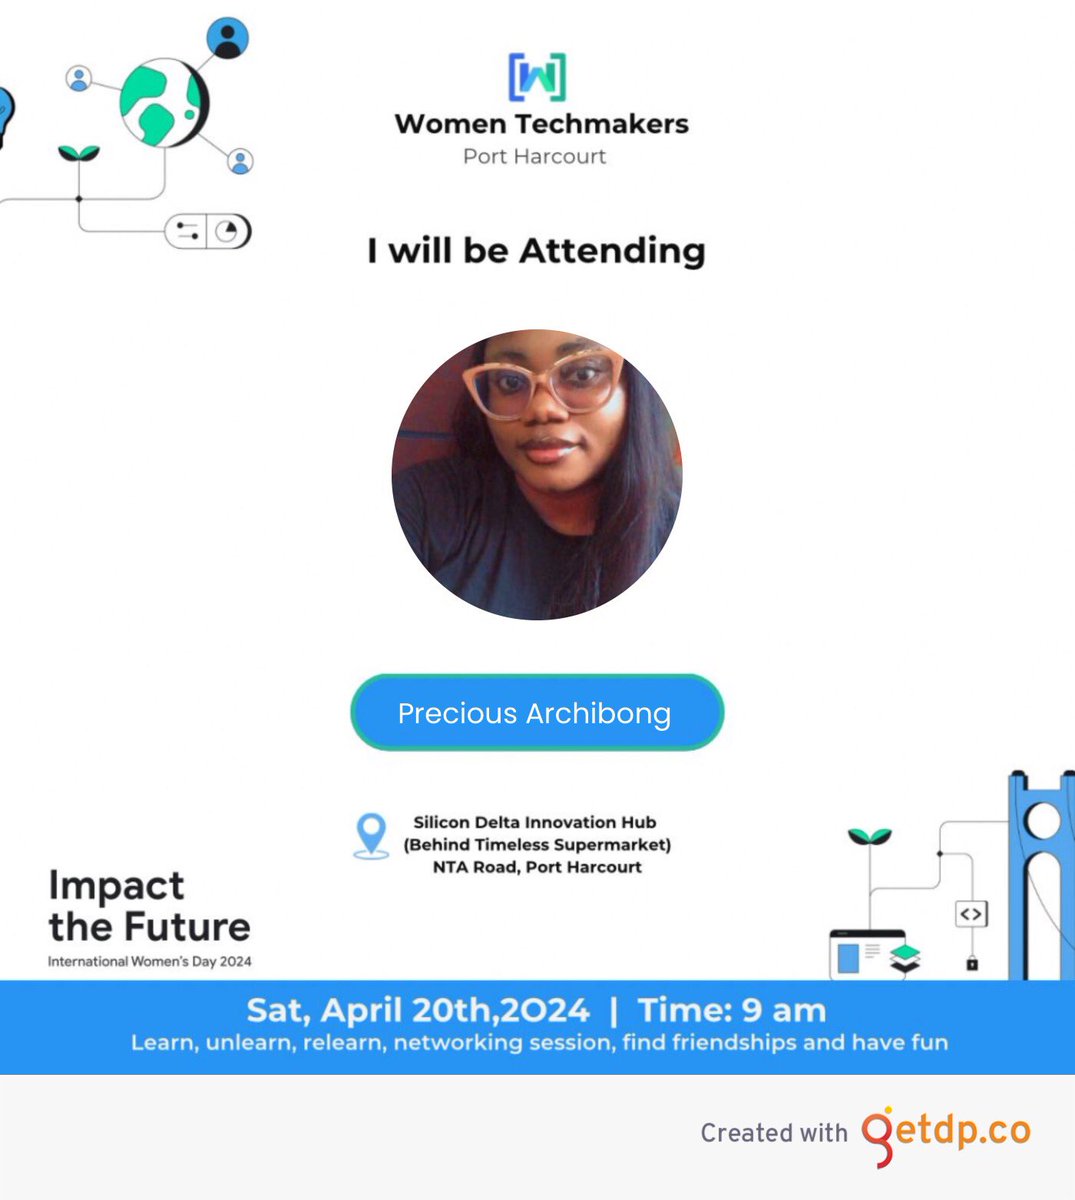 Don't miss out on this incredible opportunity to be part of a dynamic community of women driving innovation and leadership in technology. 

Secure your spot today at 
bit.ly/WTMPH_IWD2024 and get ready to unleash your full potential.

#wtmph_iwd24